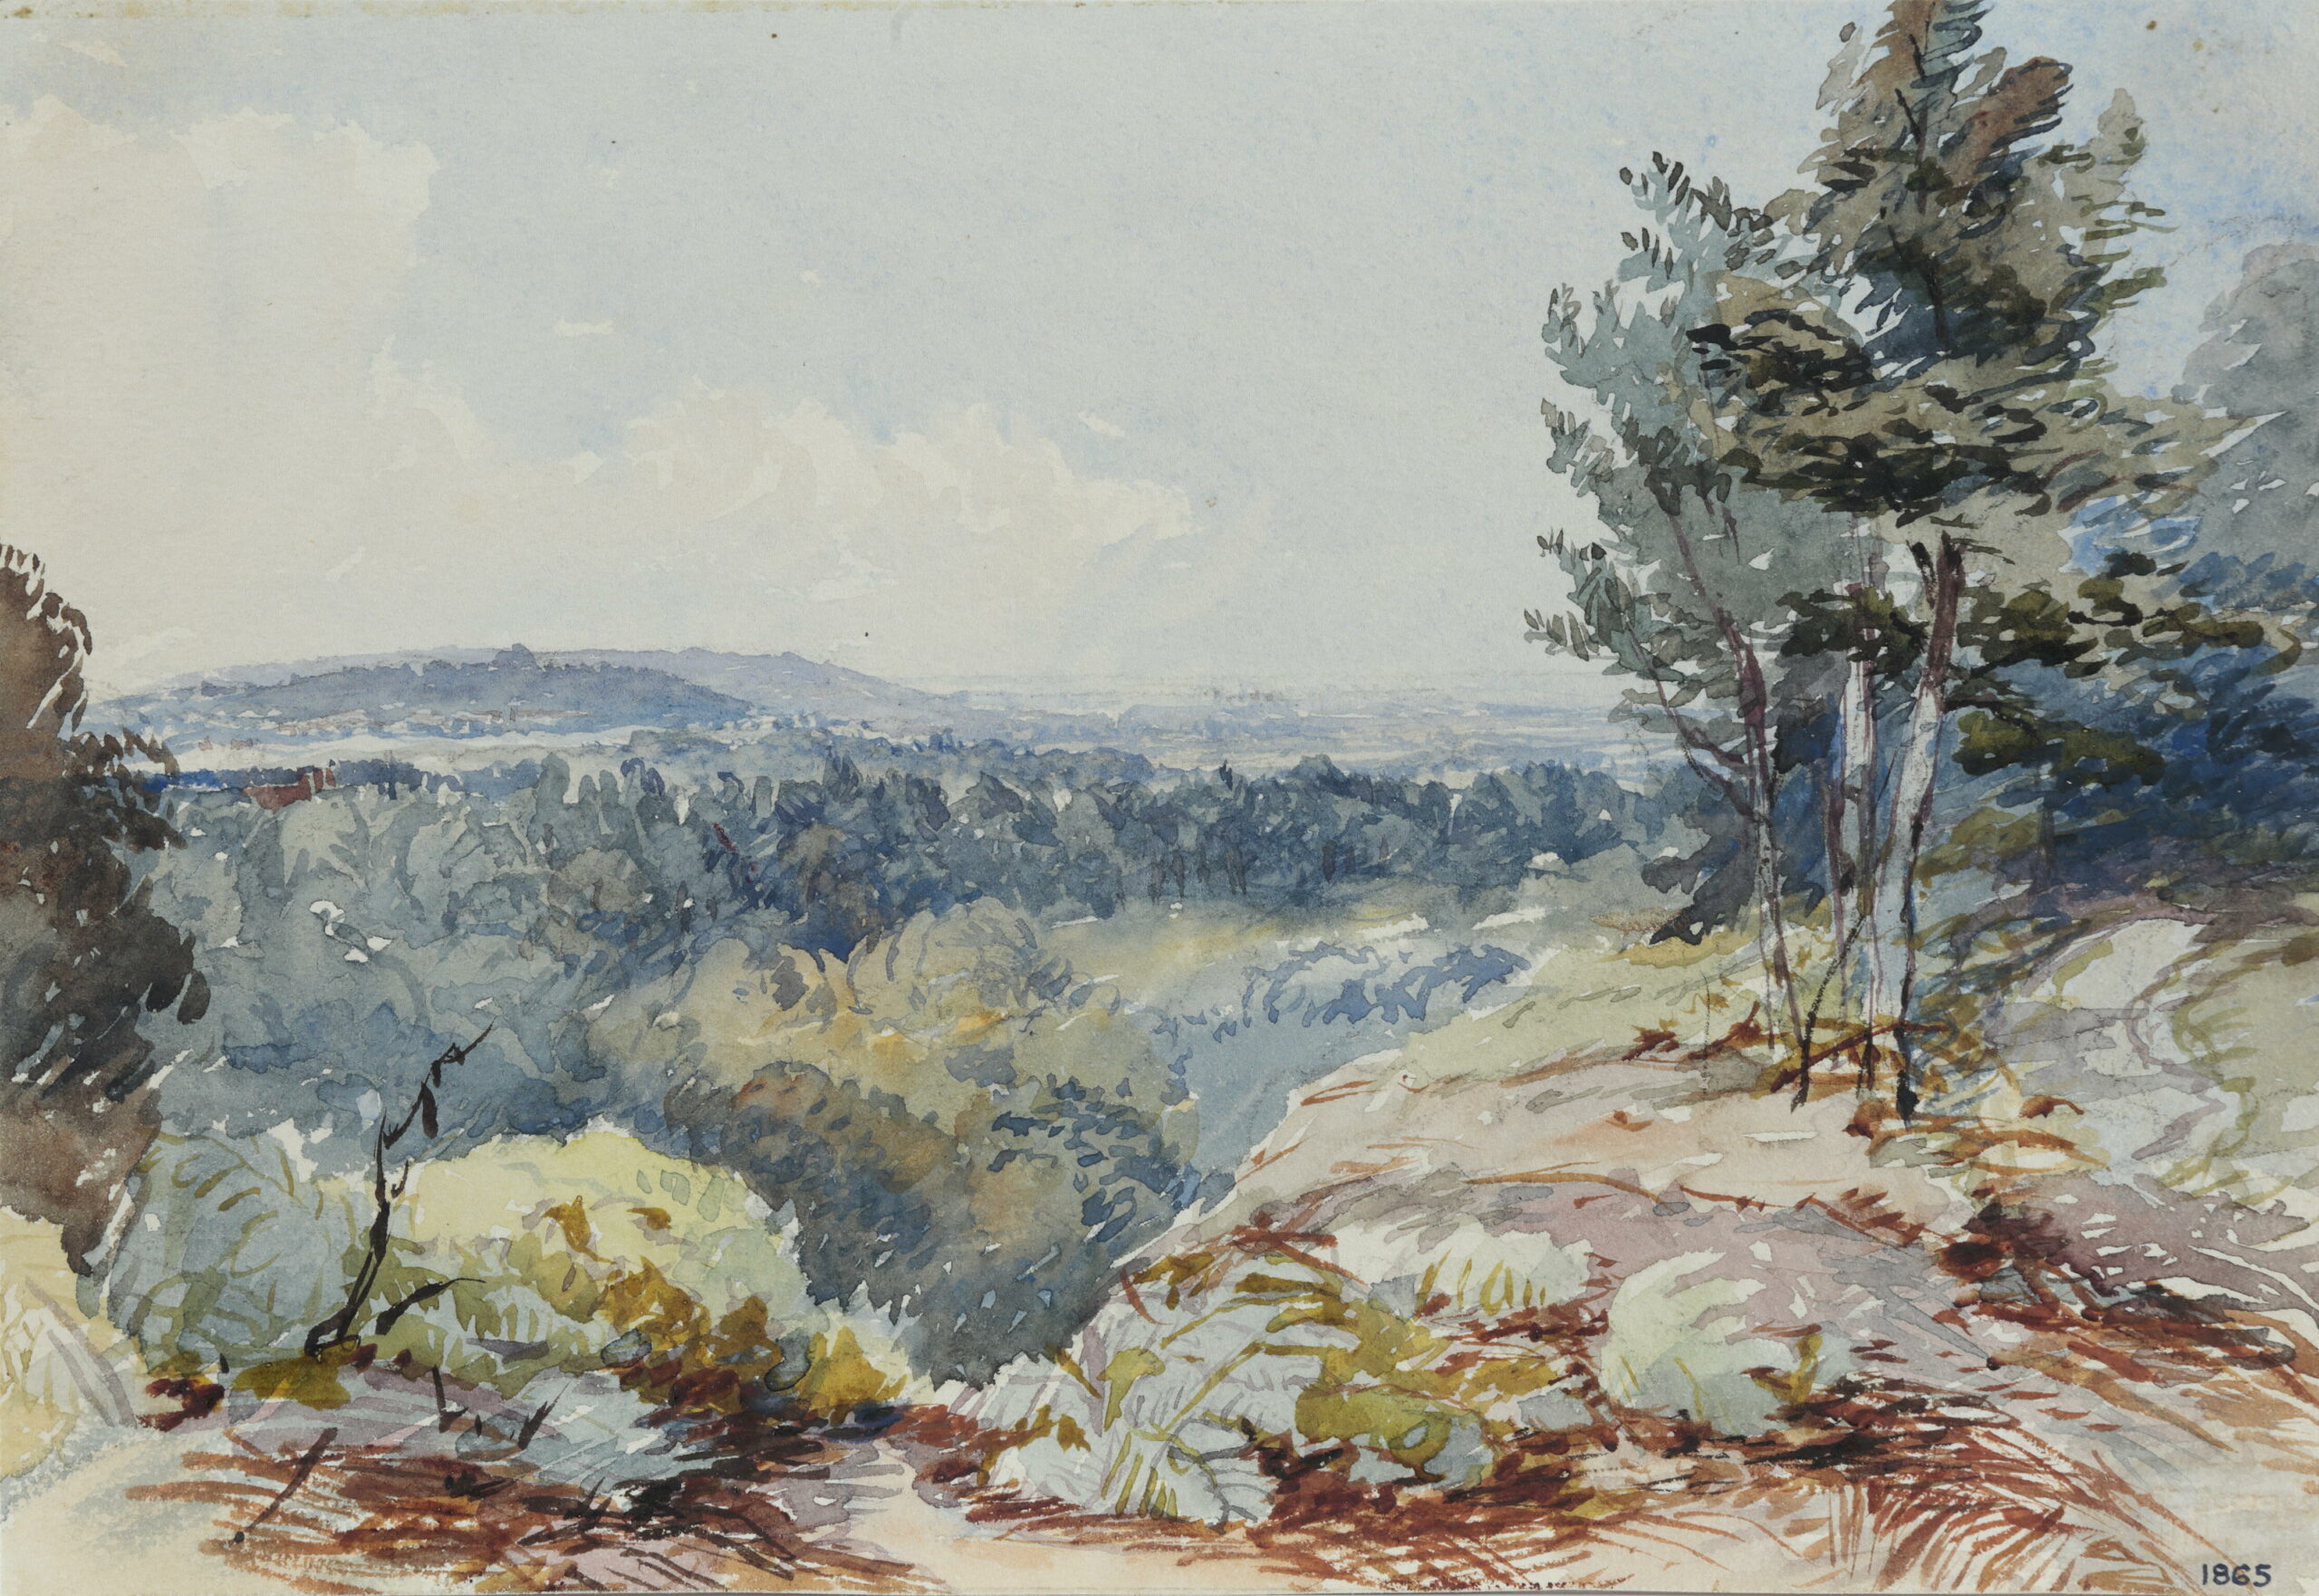 A watercolour of St. George's Hill by an unknown artist. The painting is now stored in Elmbridge Museum's collection and is dated to September 1865, around 200 years after the Diggers occupied the land there.